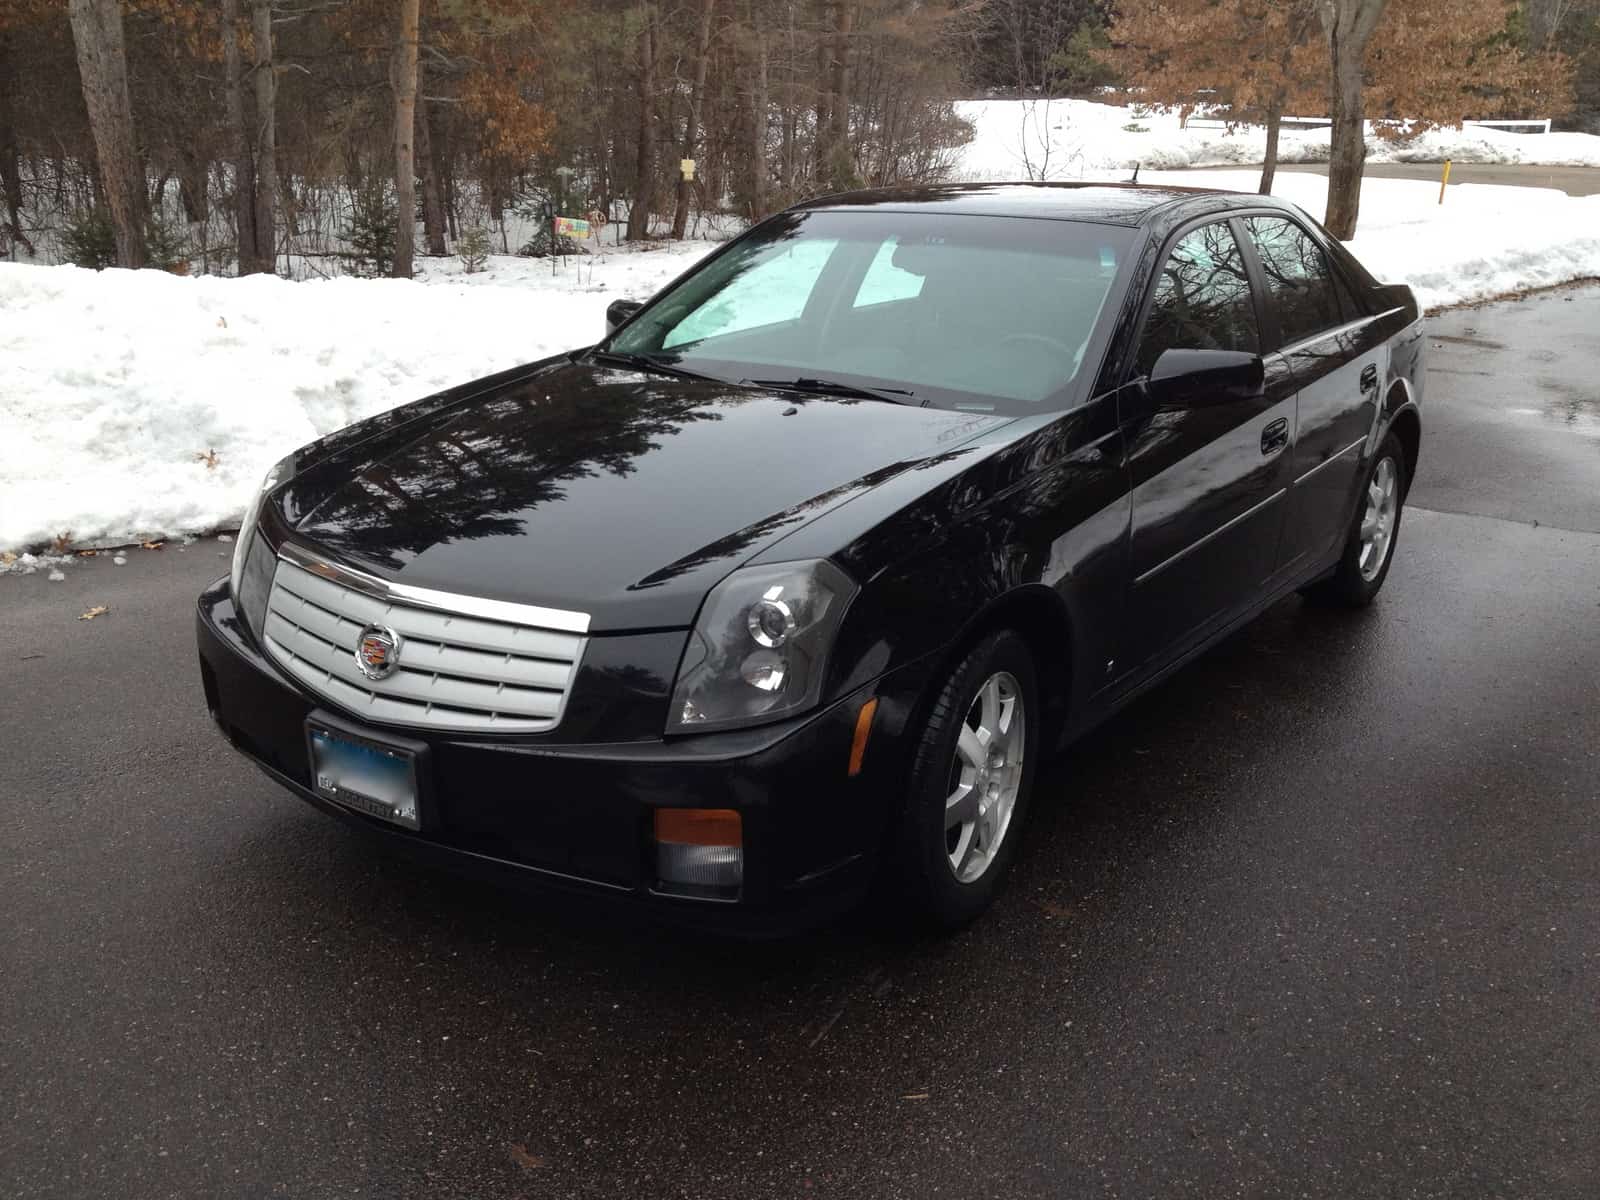 Cars under 5000 include the Cadillac CTS